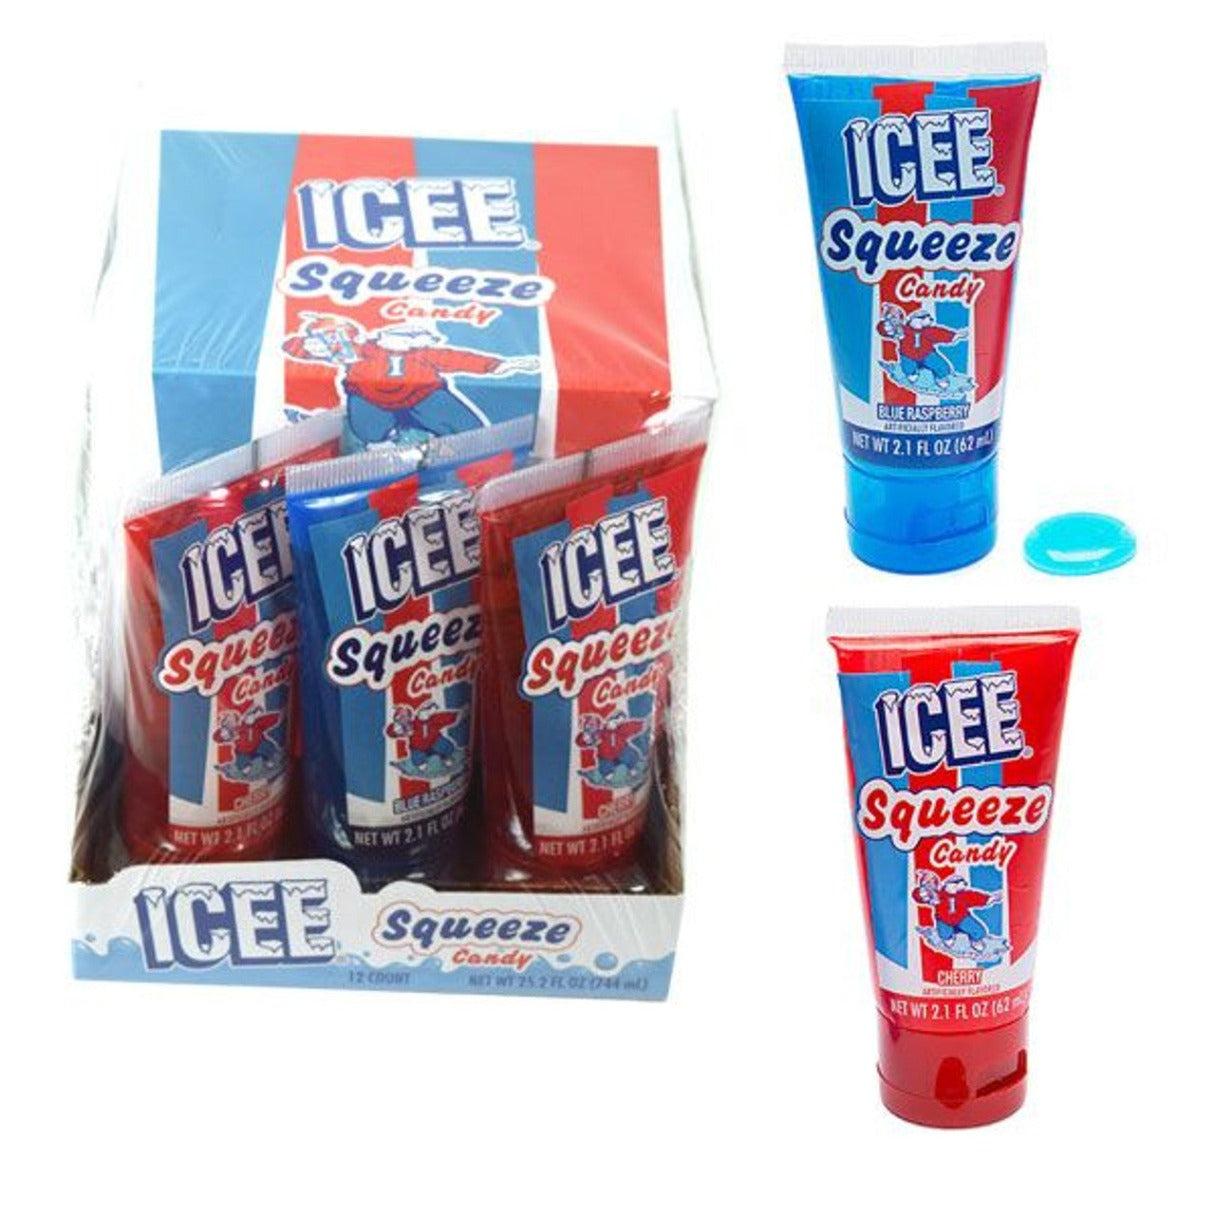 Koko's Icee Sour Squeeze Candy 2.1oz - 12ct